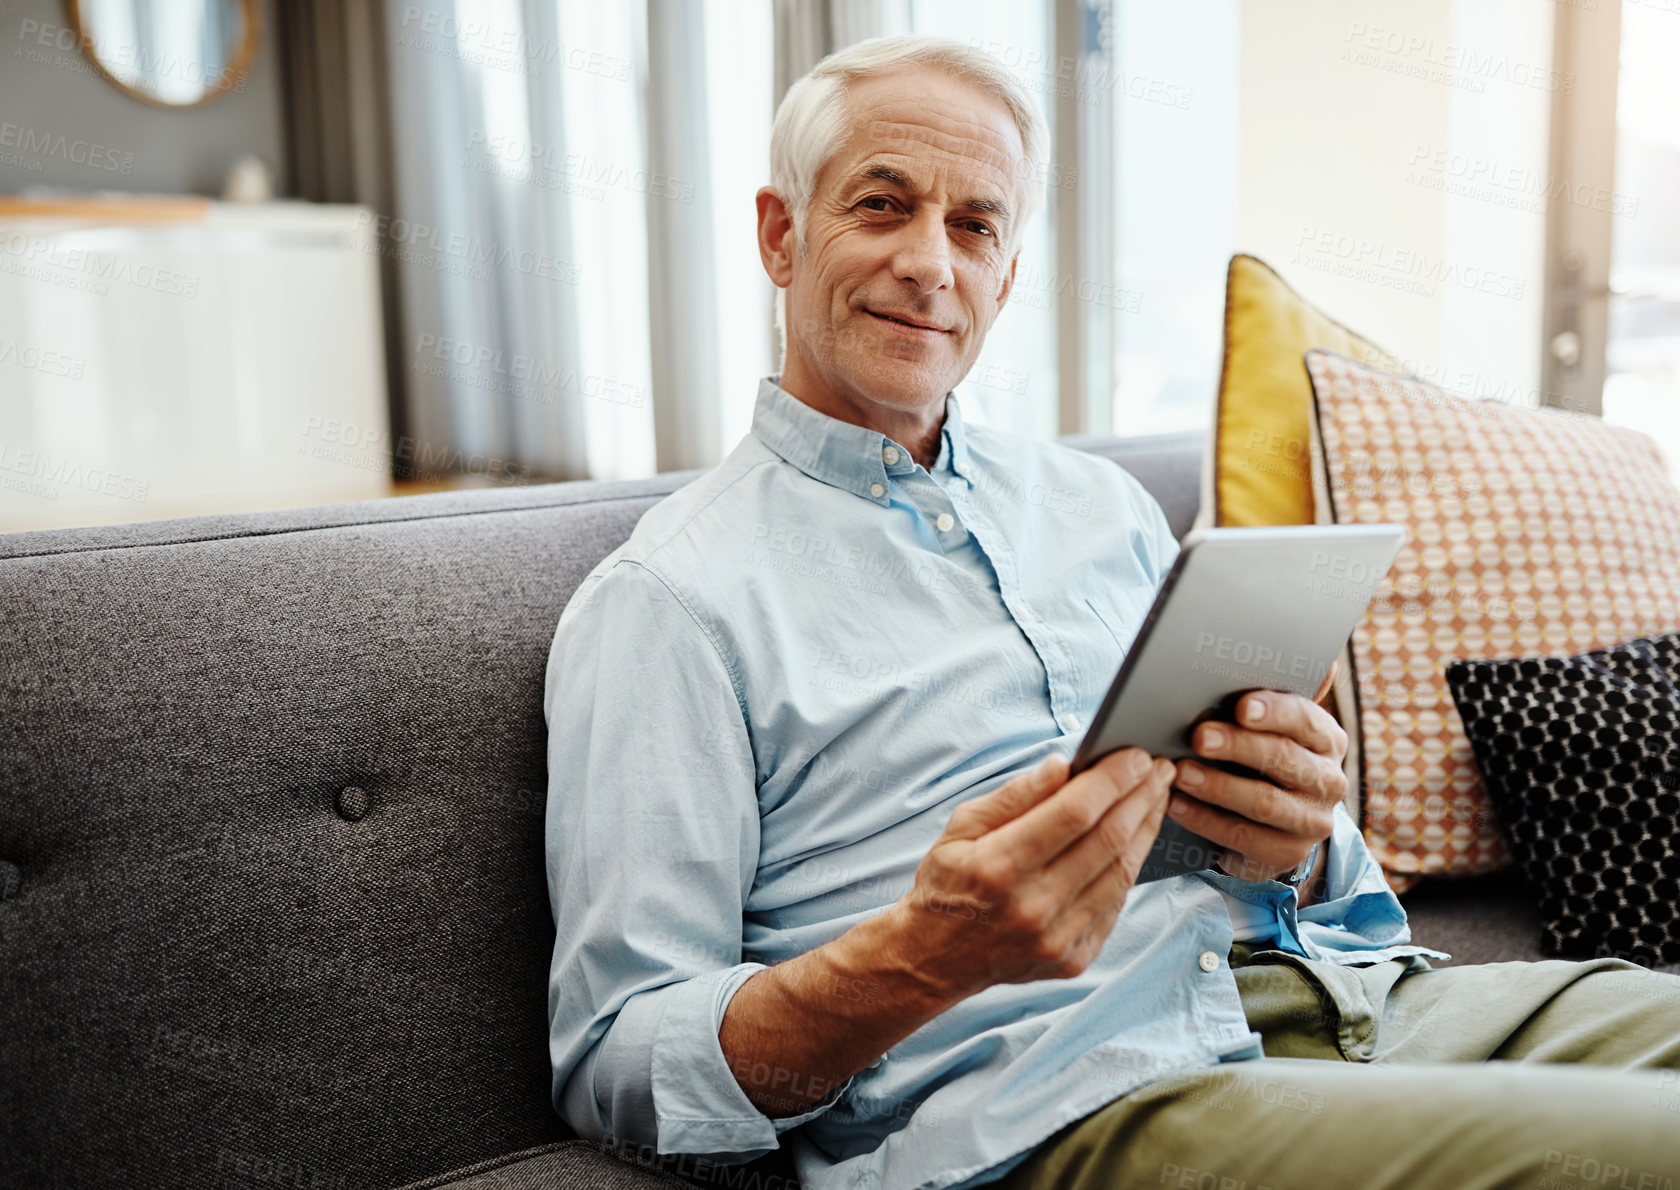 Buy stock photo Shot of a senior man relaxing and using a digital tablet on the sofa at home